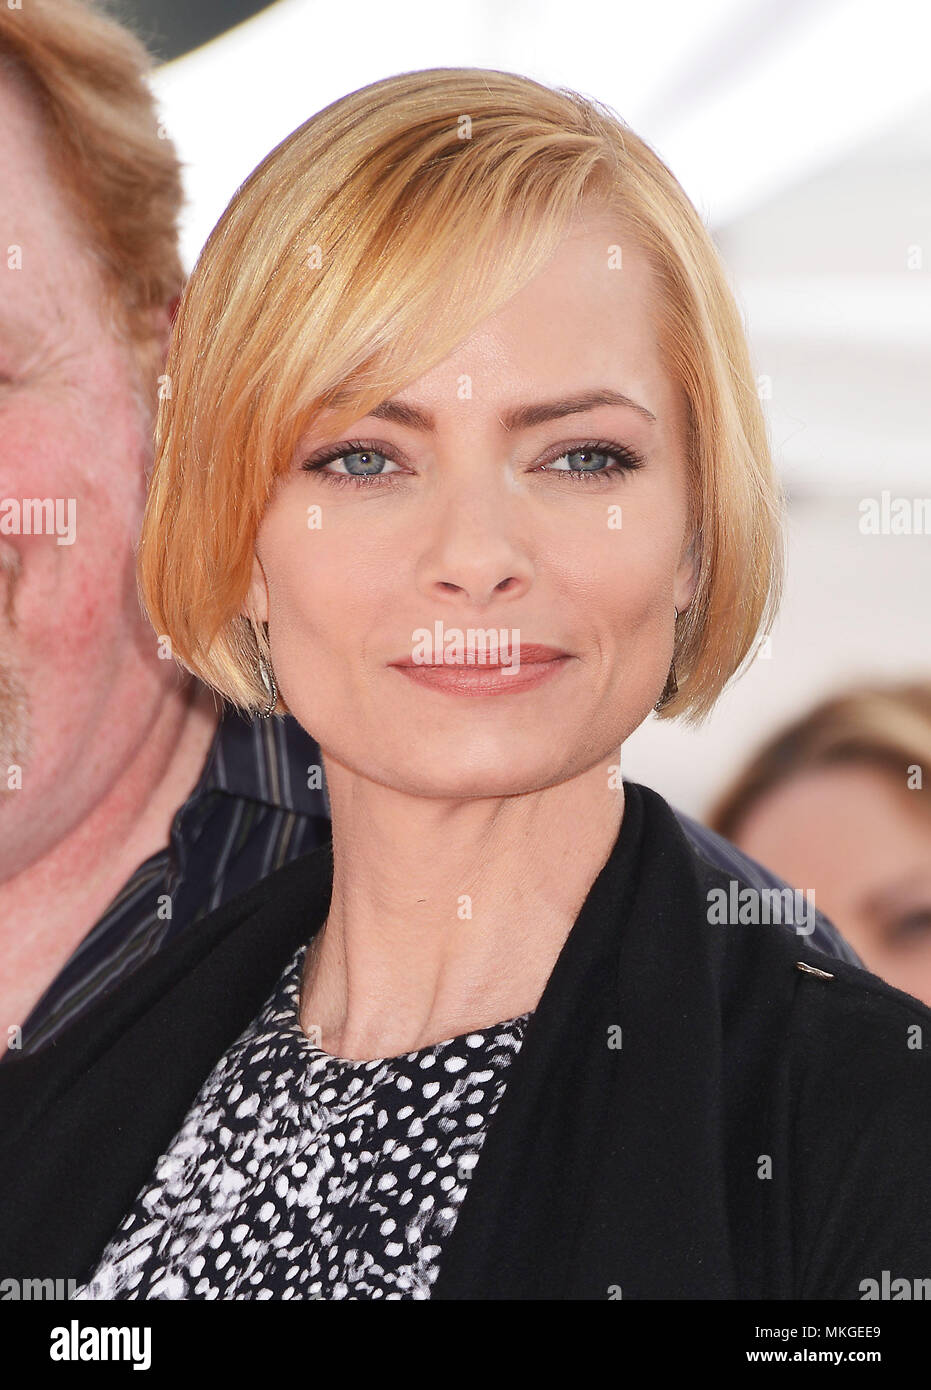 Jaime Pressly 028  Allison Janney honored with a Star on the Hollywood Walk of Fame in Los Angeles. October 17, 2016.Jaime Pressly 028  Event in Hollywood Life - California,  Red Carpet Event, Vertical, USA, Film Industry, Celebrities,  Photography, Bestof, Arts Culture and Entertainment, Topix Celebrities fashion / one person, Vertical, Best of, Hollywood Life, Event in Hollywood Life - California,  Red Carpet and backstage, USA, Film Industry, Celebrities,  movie celebrities, TV celebrities, Music celebrities, Photography, Bestof, Arts Culture and Entertainment,  Topix, headshot, vertical, f Stock Photo